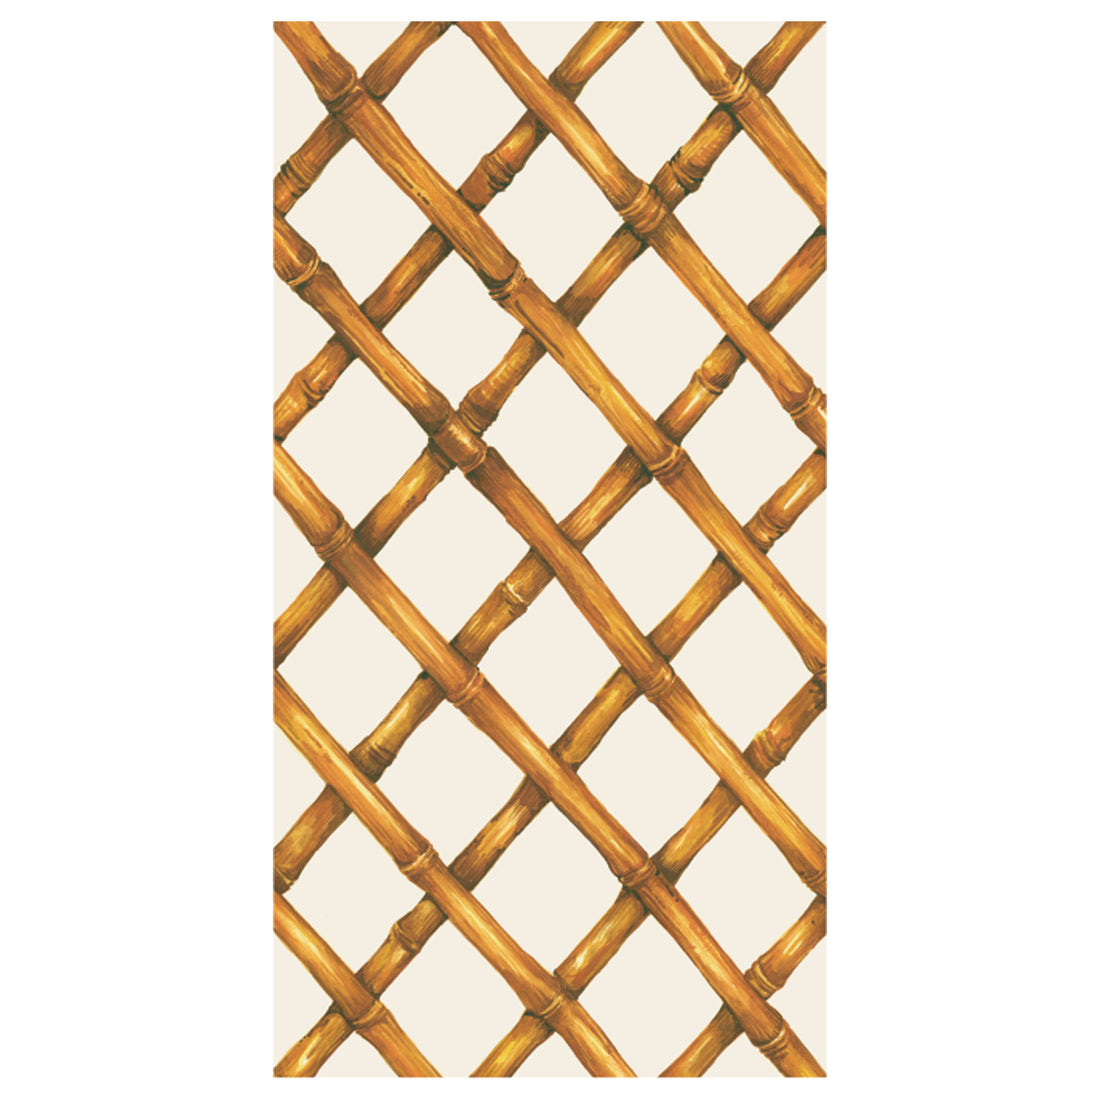 A diagonal woven bamboo pattern in tan on a white background, on a rectangle cocktail napkin.